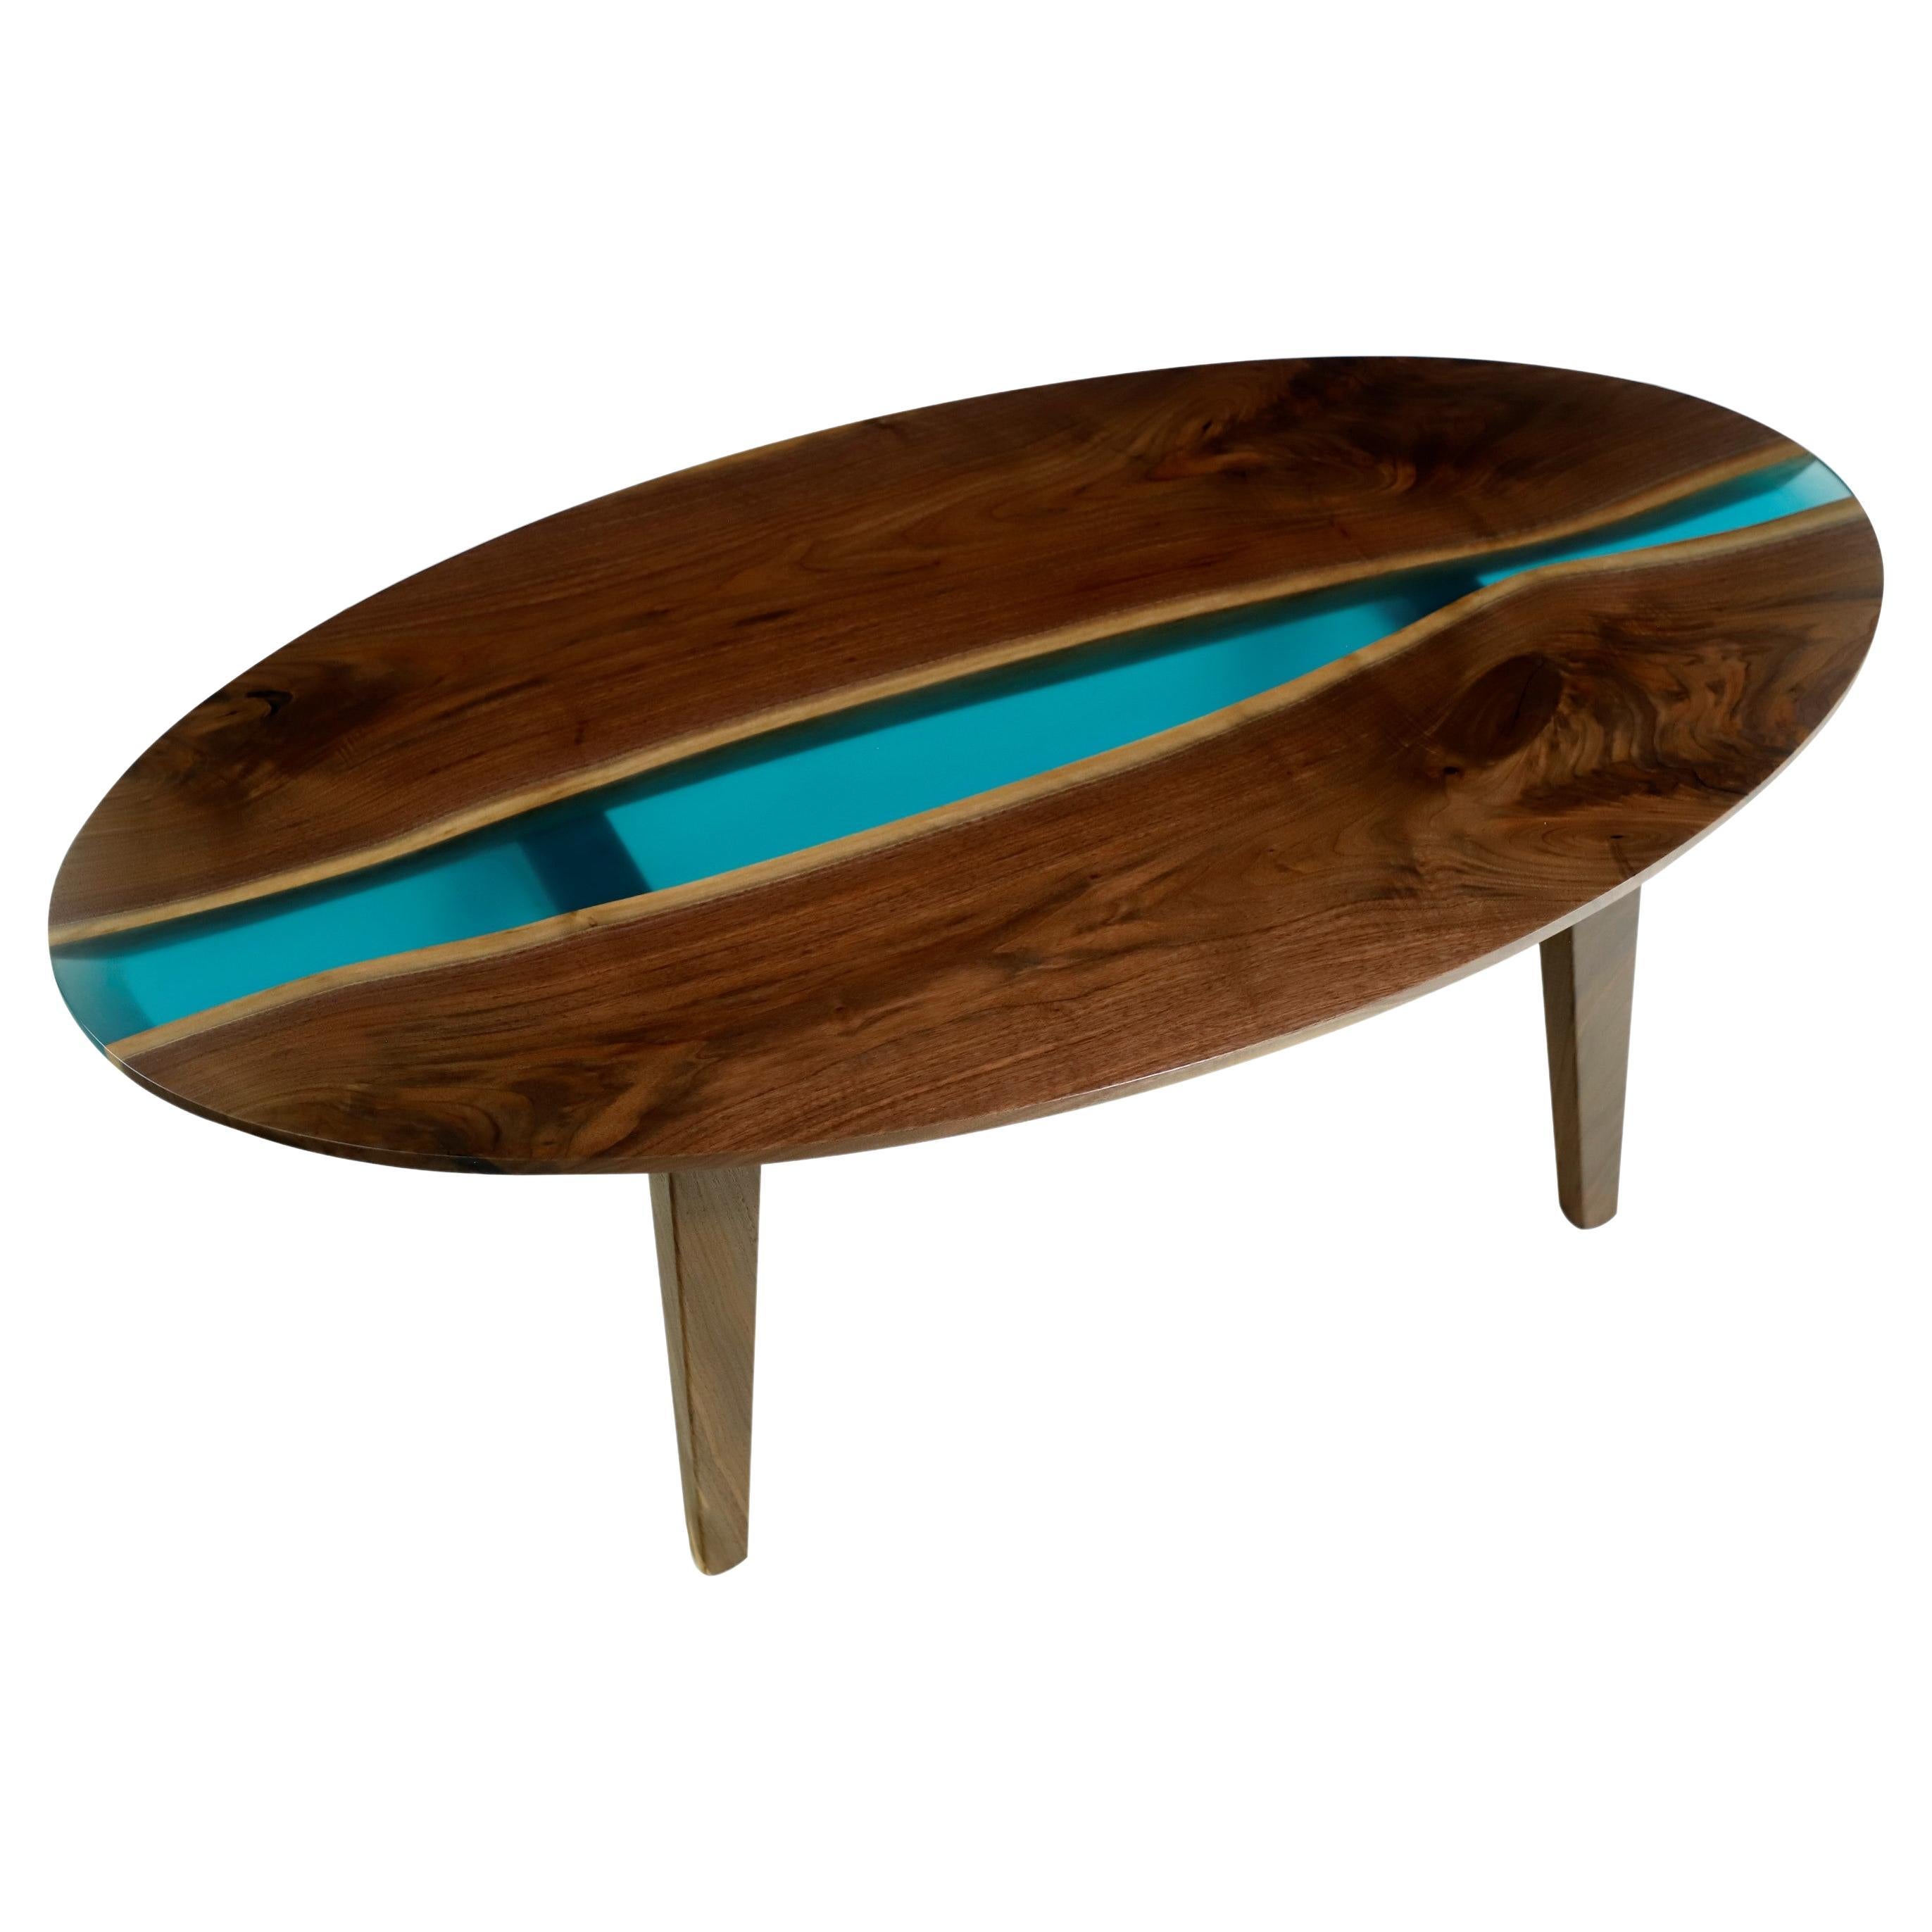 Live Edge Solid Walnut + Resin Oval Coffee Table